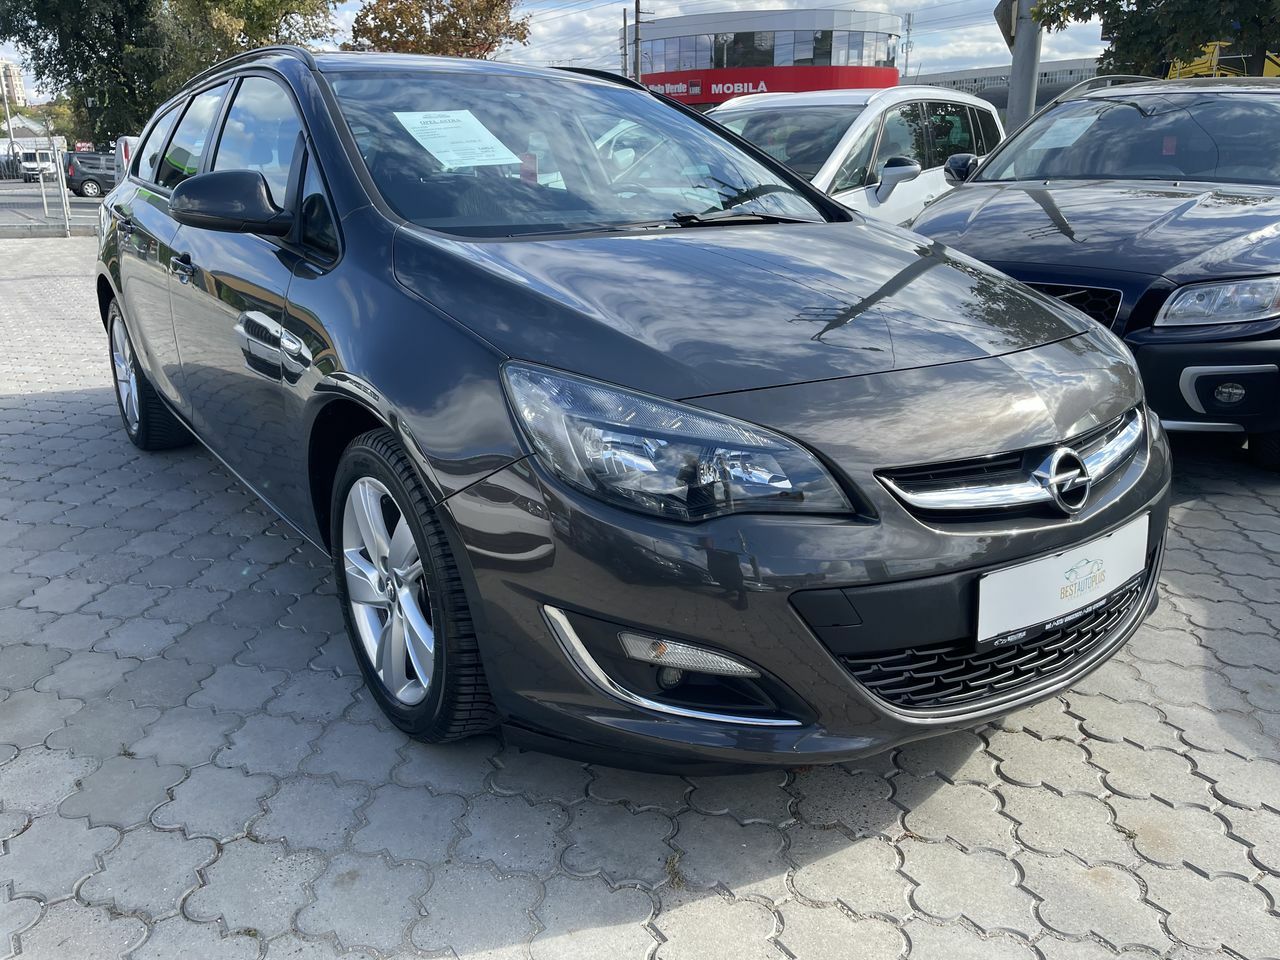 <span style="font-weight: 700;">Opel astra</span>